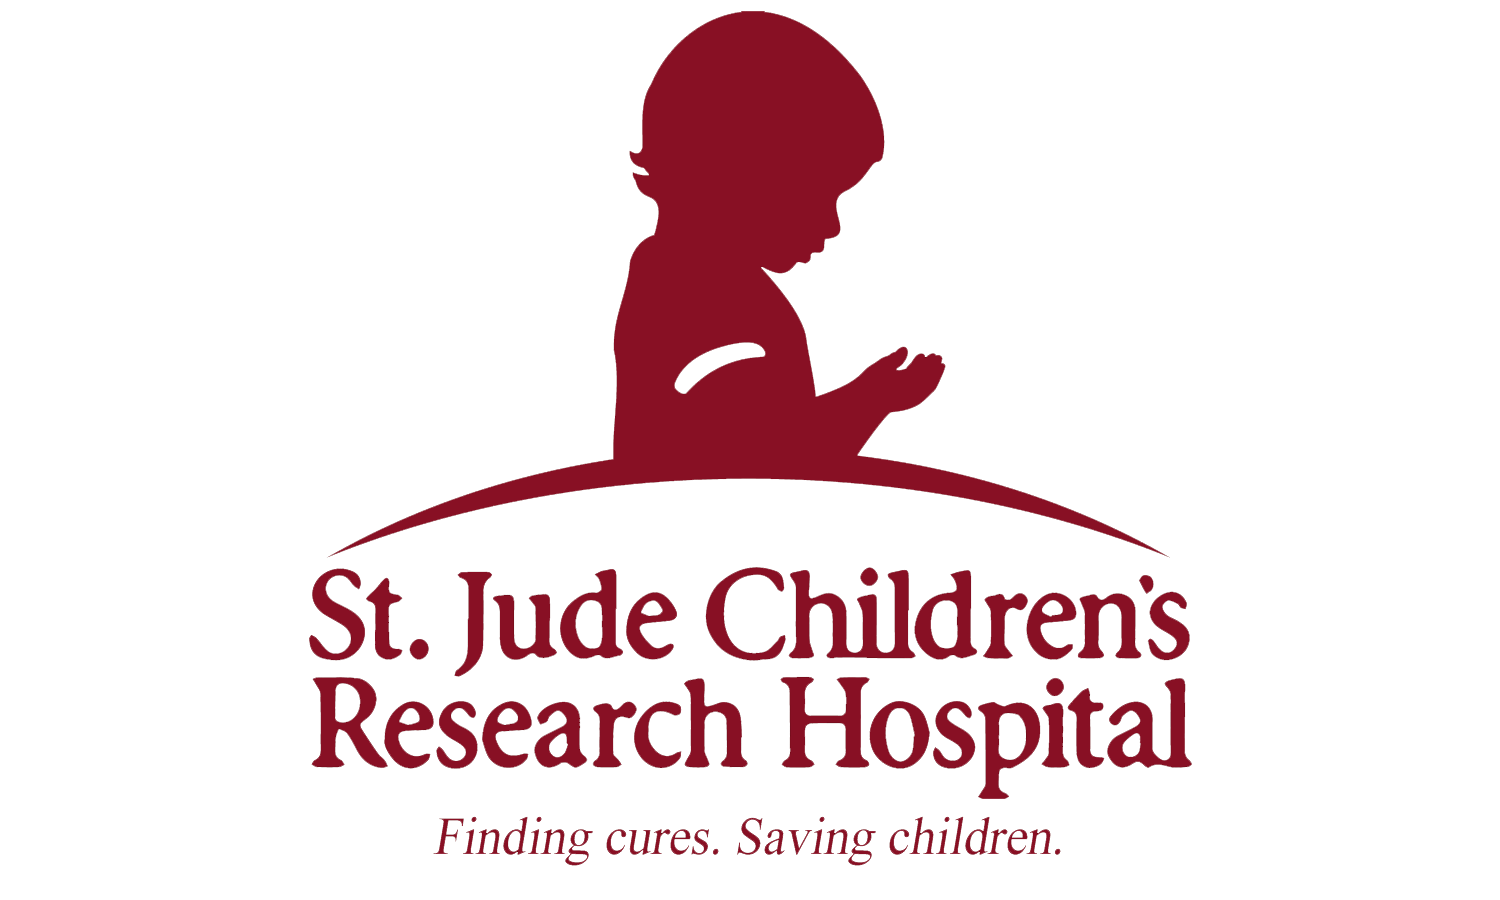 Round Up for St. Jude Children's Research Hospital